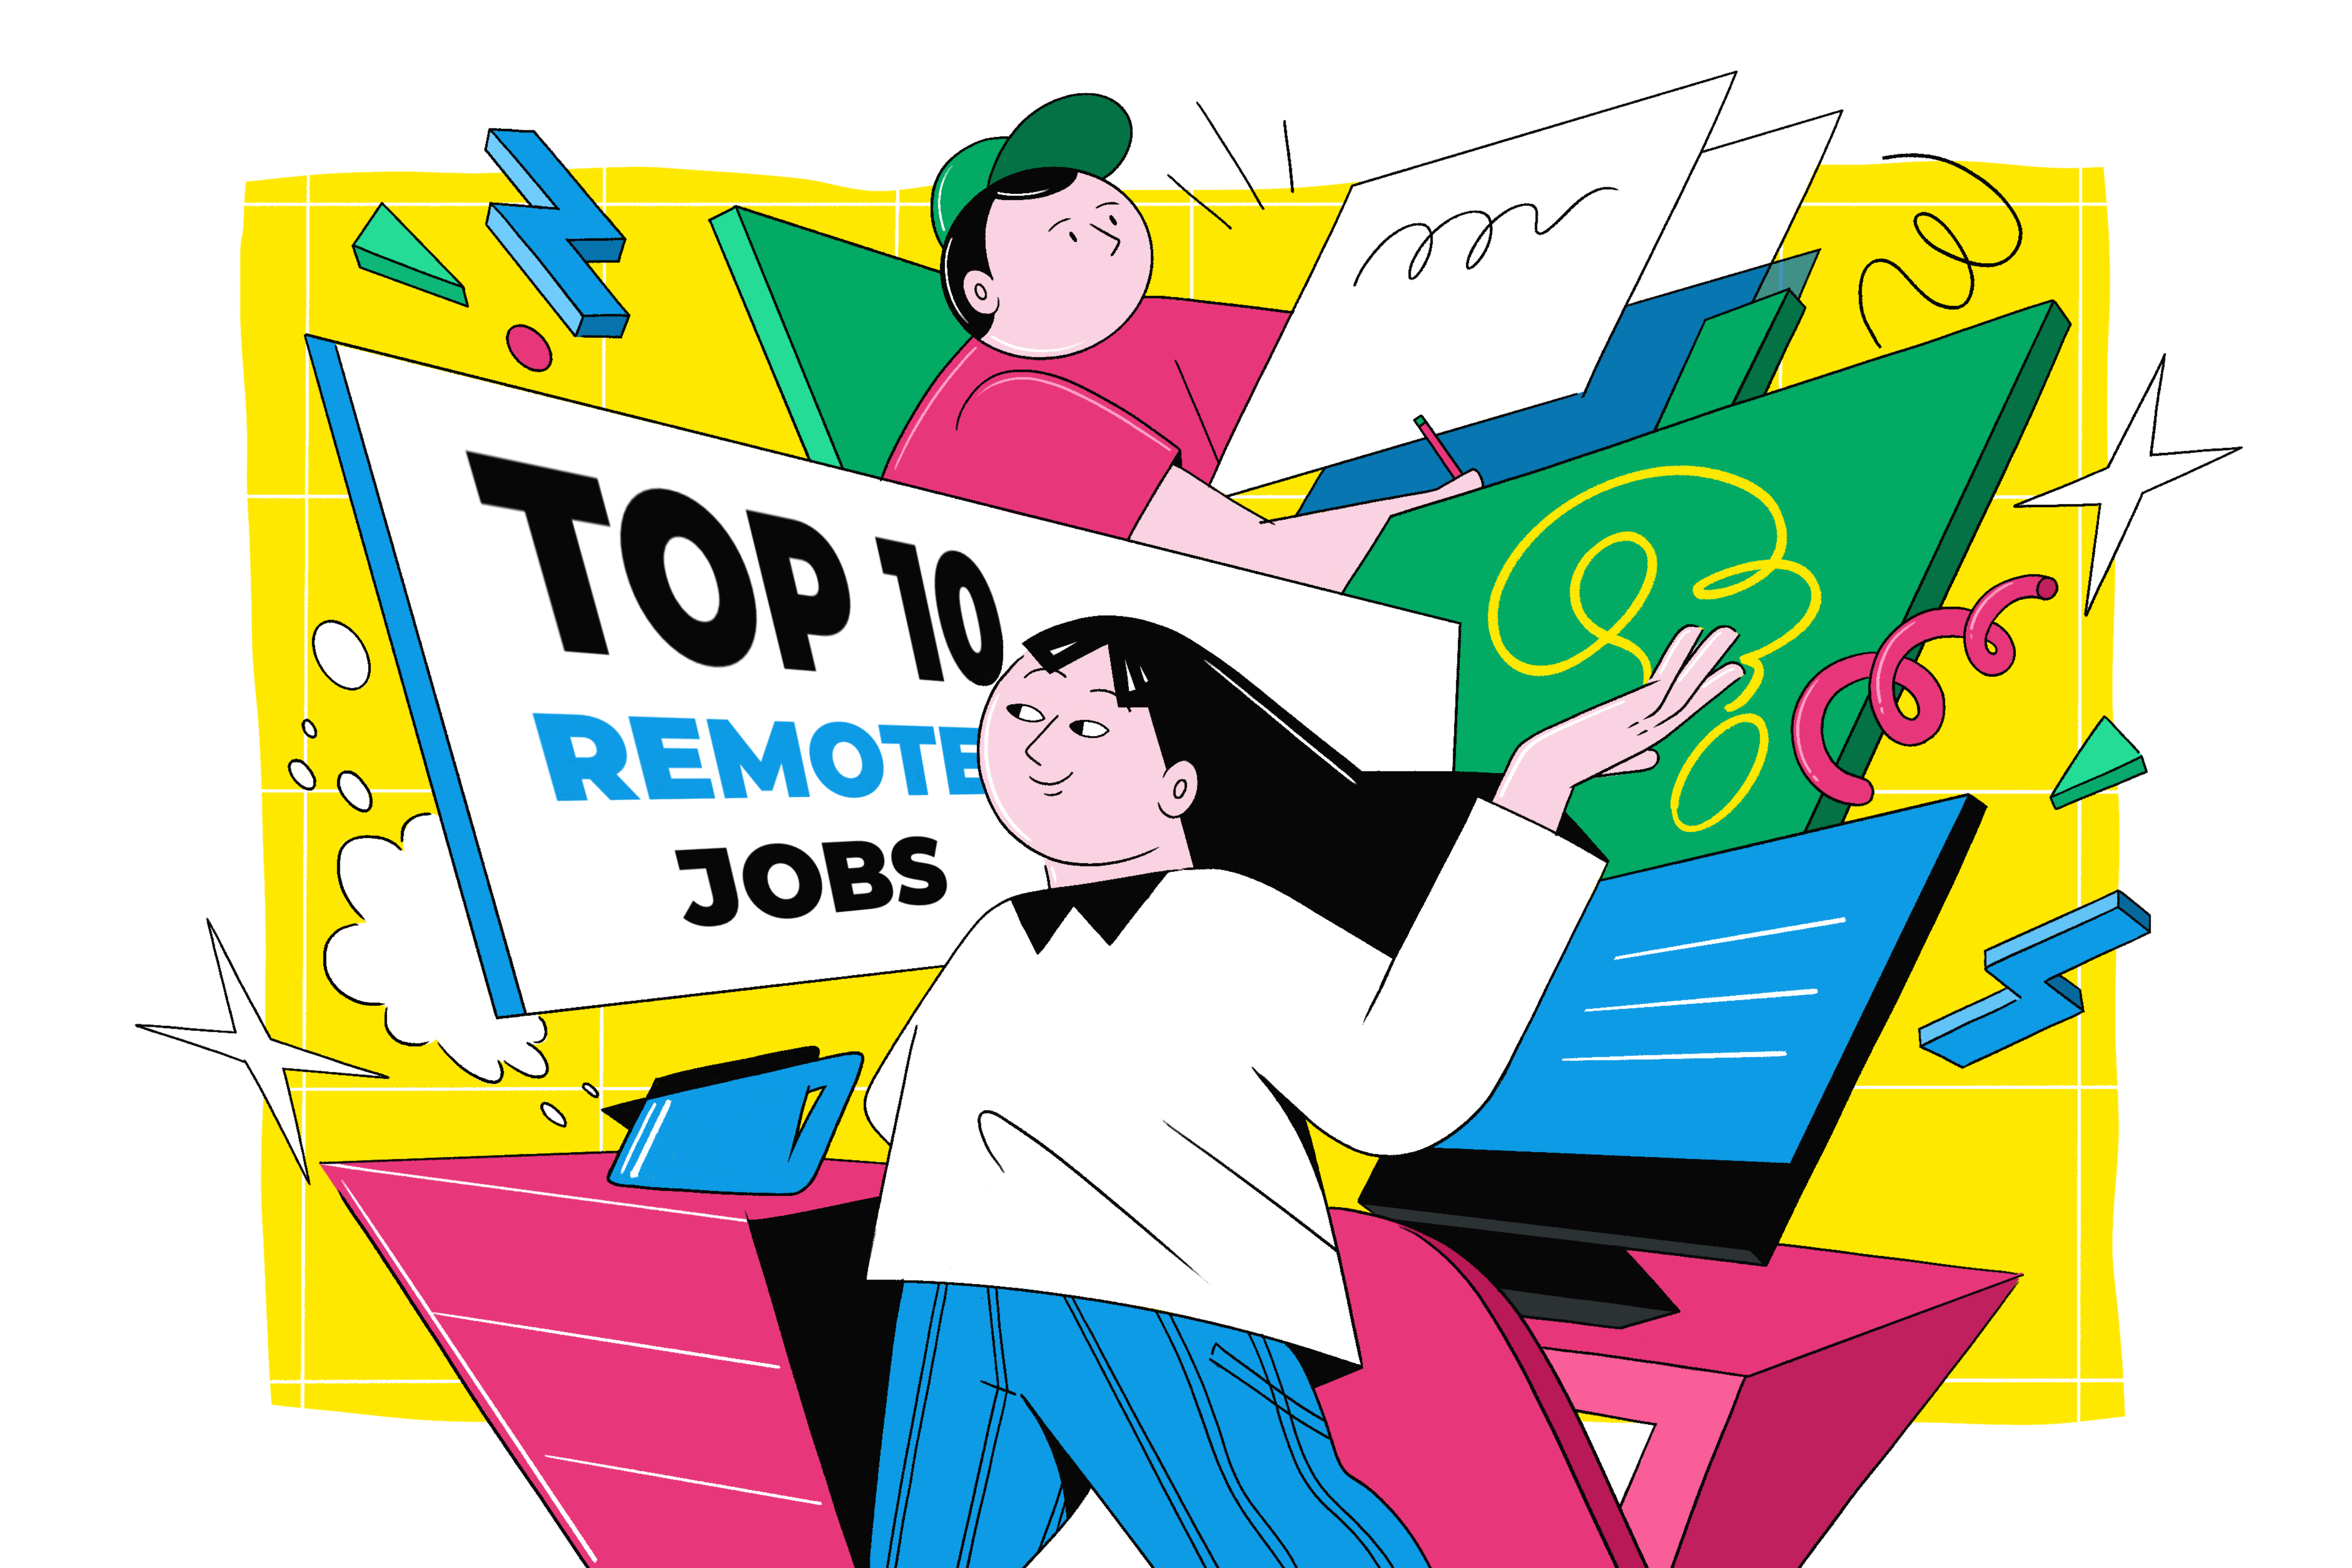 Top 10 remote jobs for 2020